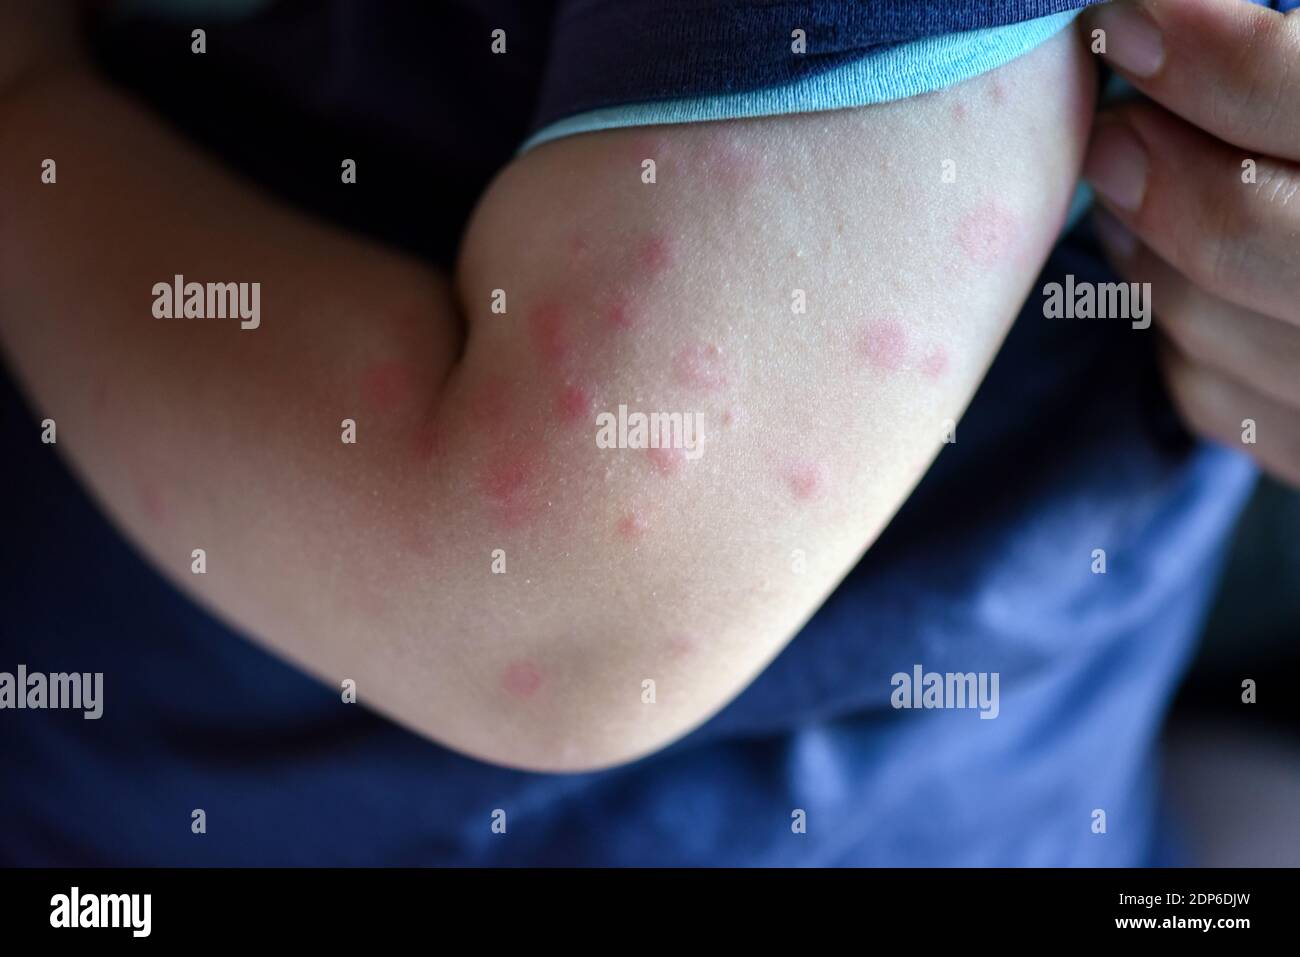 Child with hives on his arm. Hives, also known as urticaria, is a kind of skin rash with red, raised, itchy bumps or spots. Stock Photo